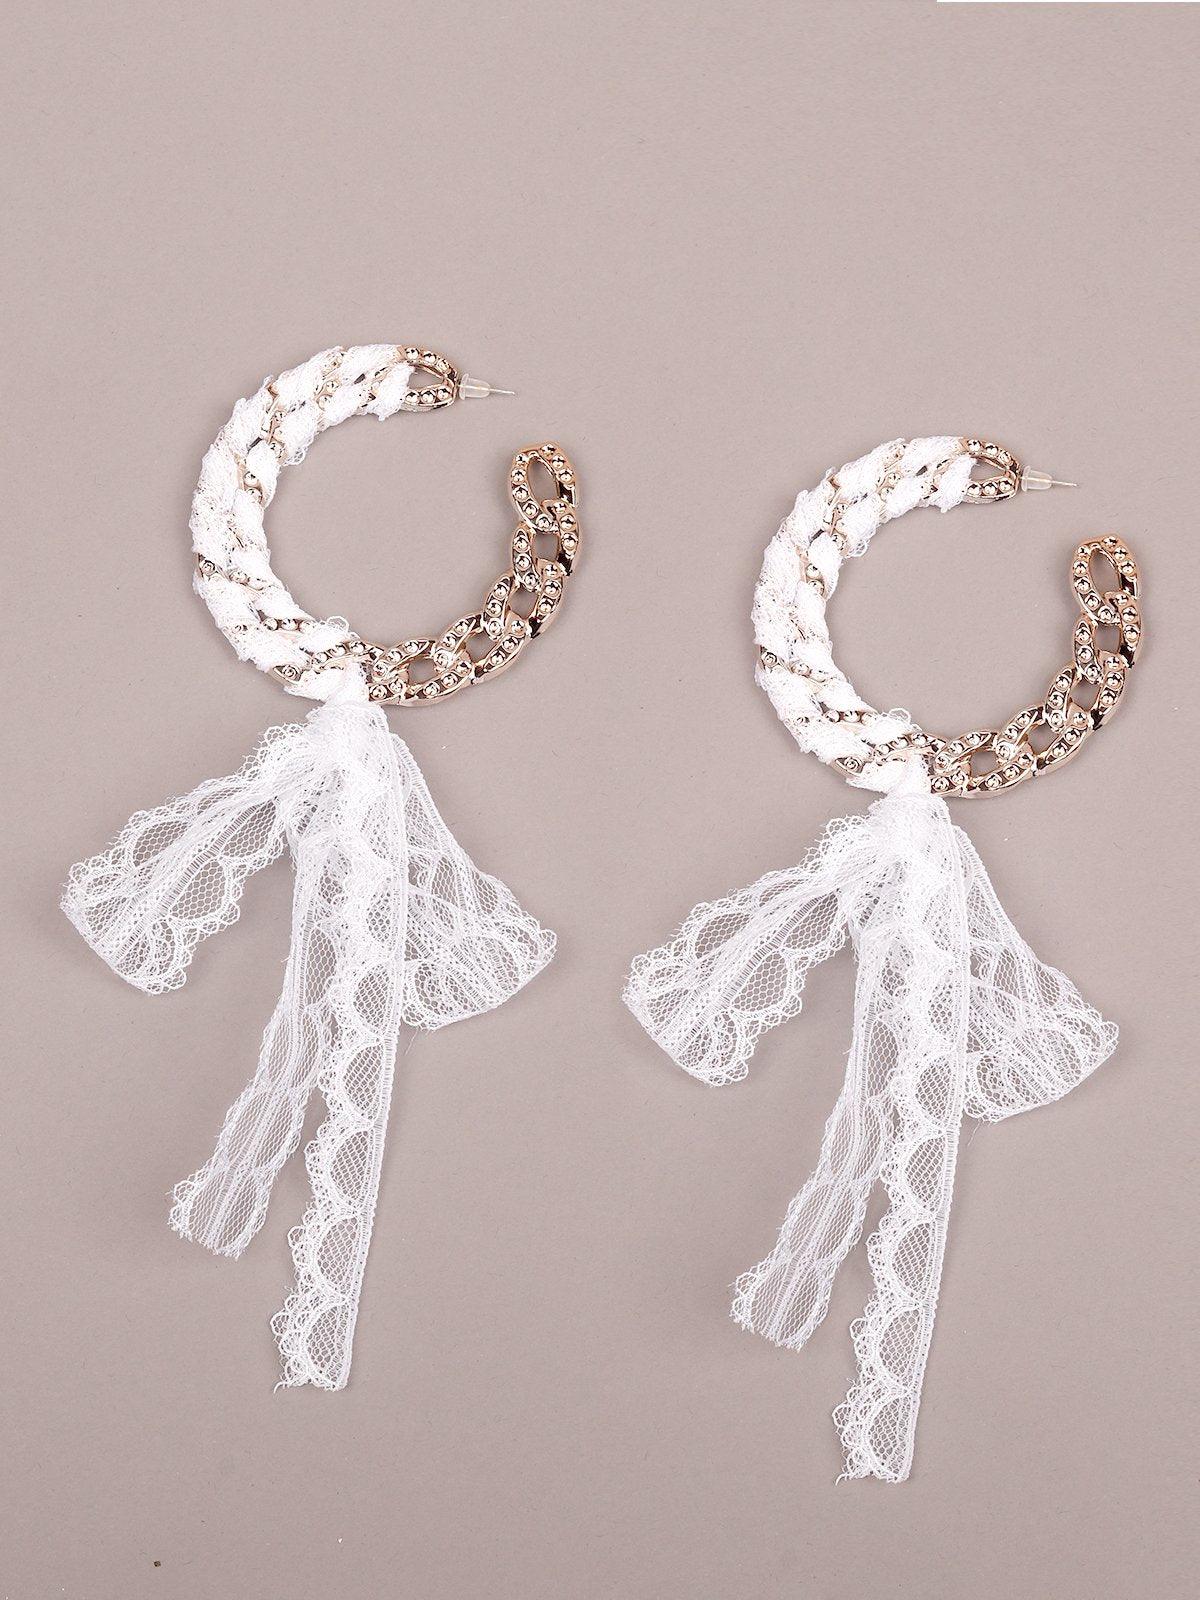 Women's Designer Chain Hoops Wrapped With White Lace - Odette